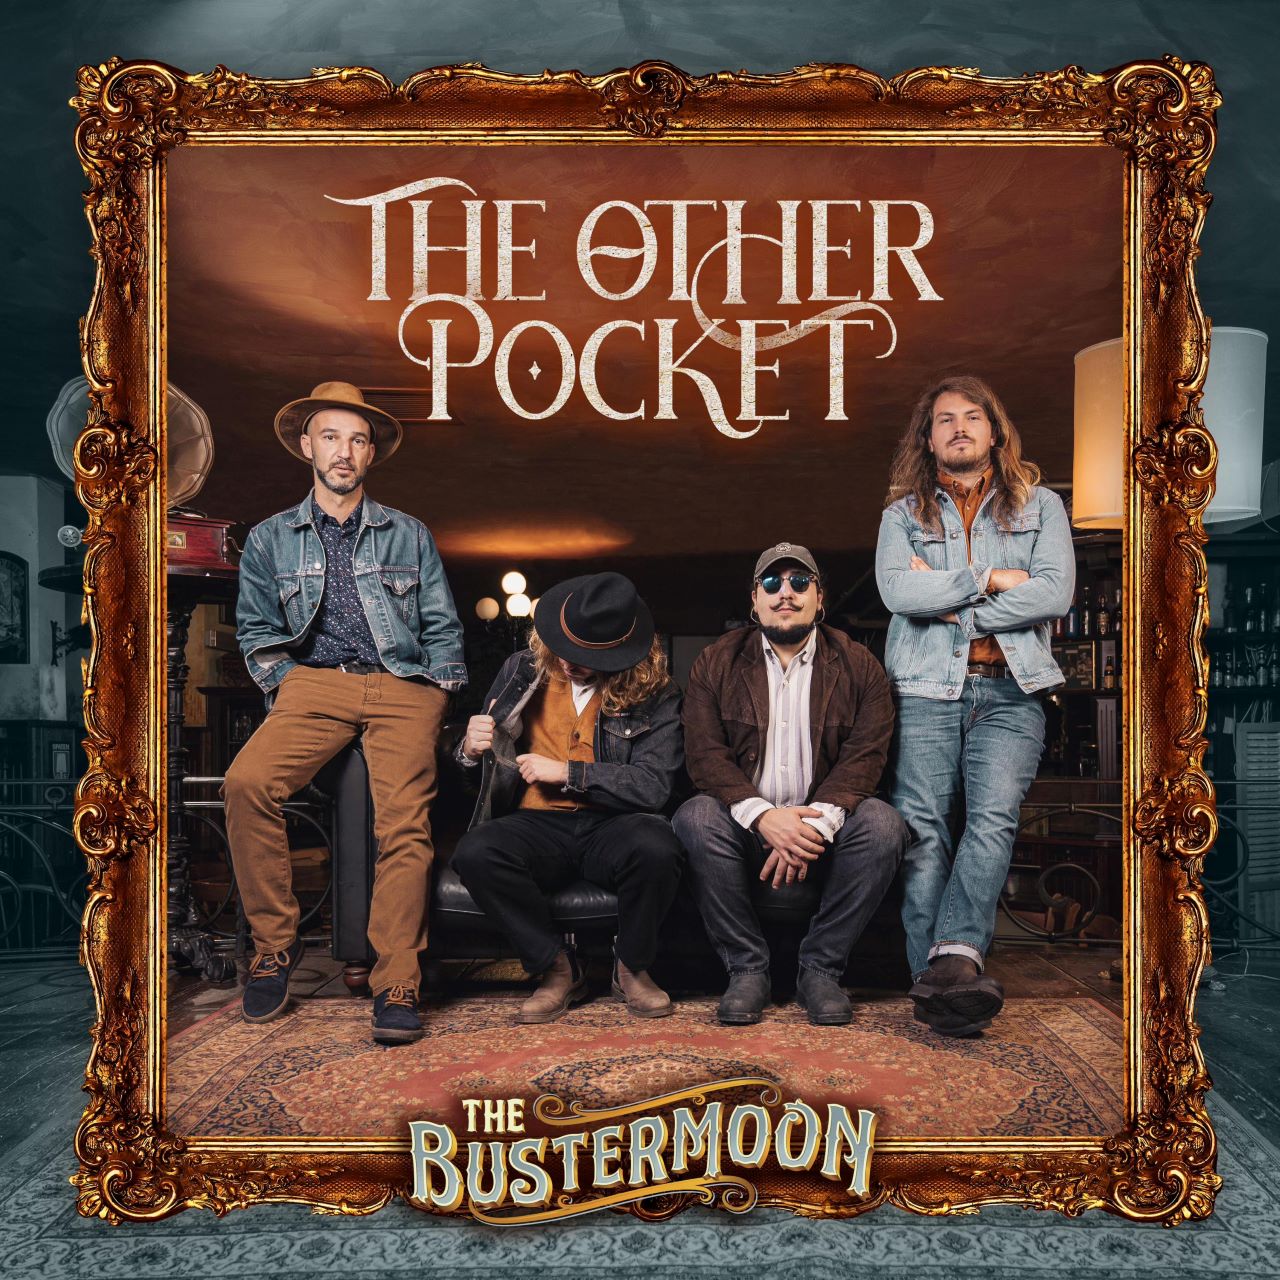 Bustermoon - The Other Pocket cover album